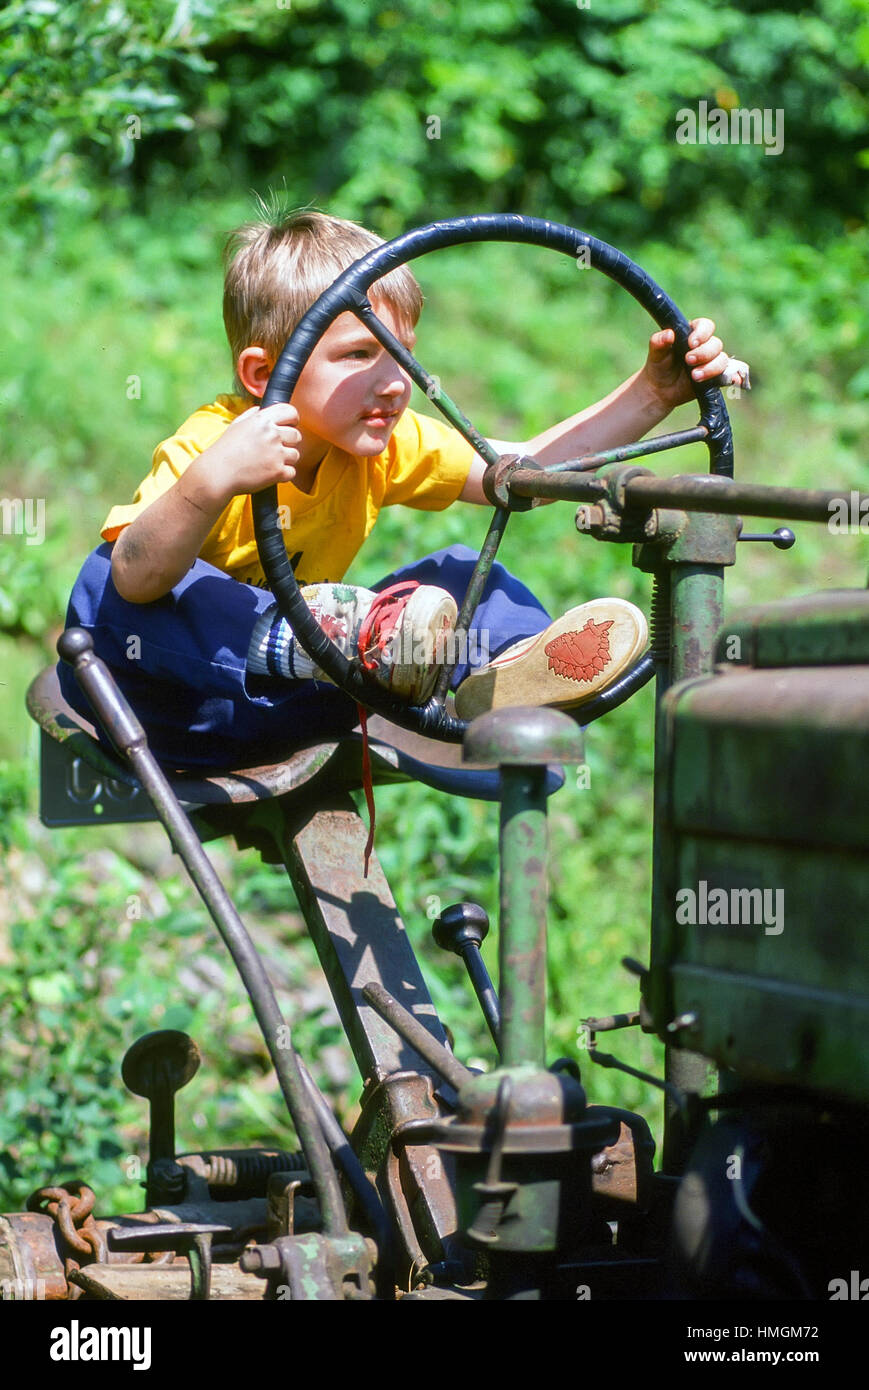 A four year old boy sits behind the wheel of an antique tractor pretend driving on the farm in Ryegate, Vermont, United States. Stock Photo